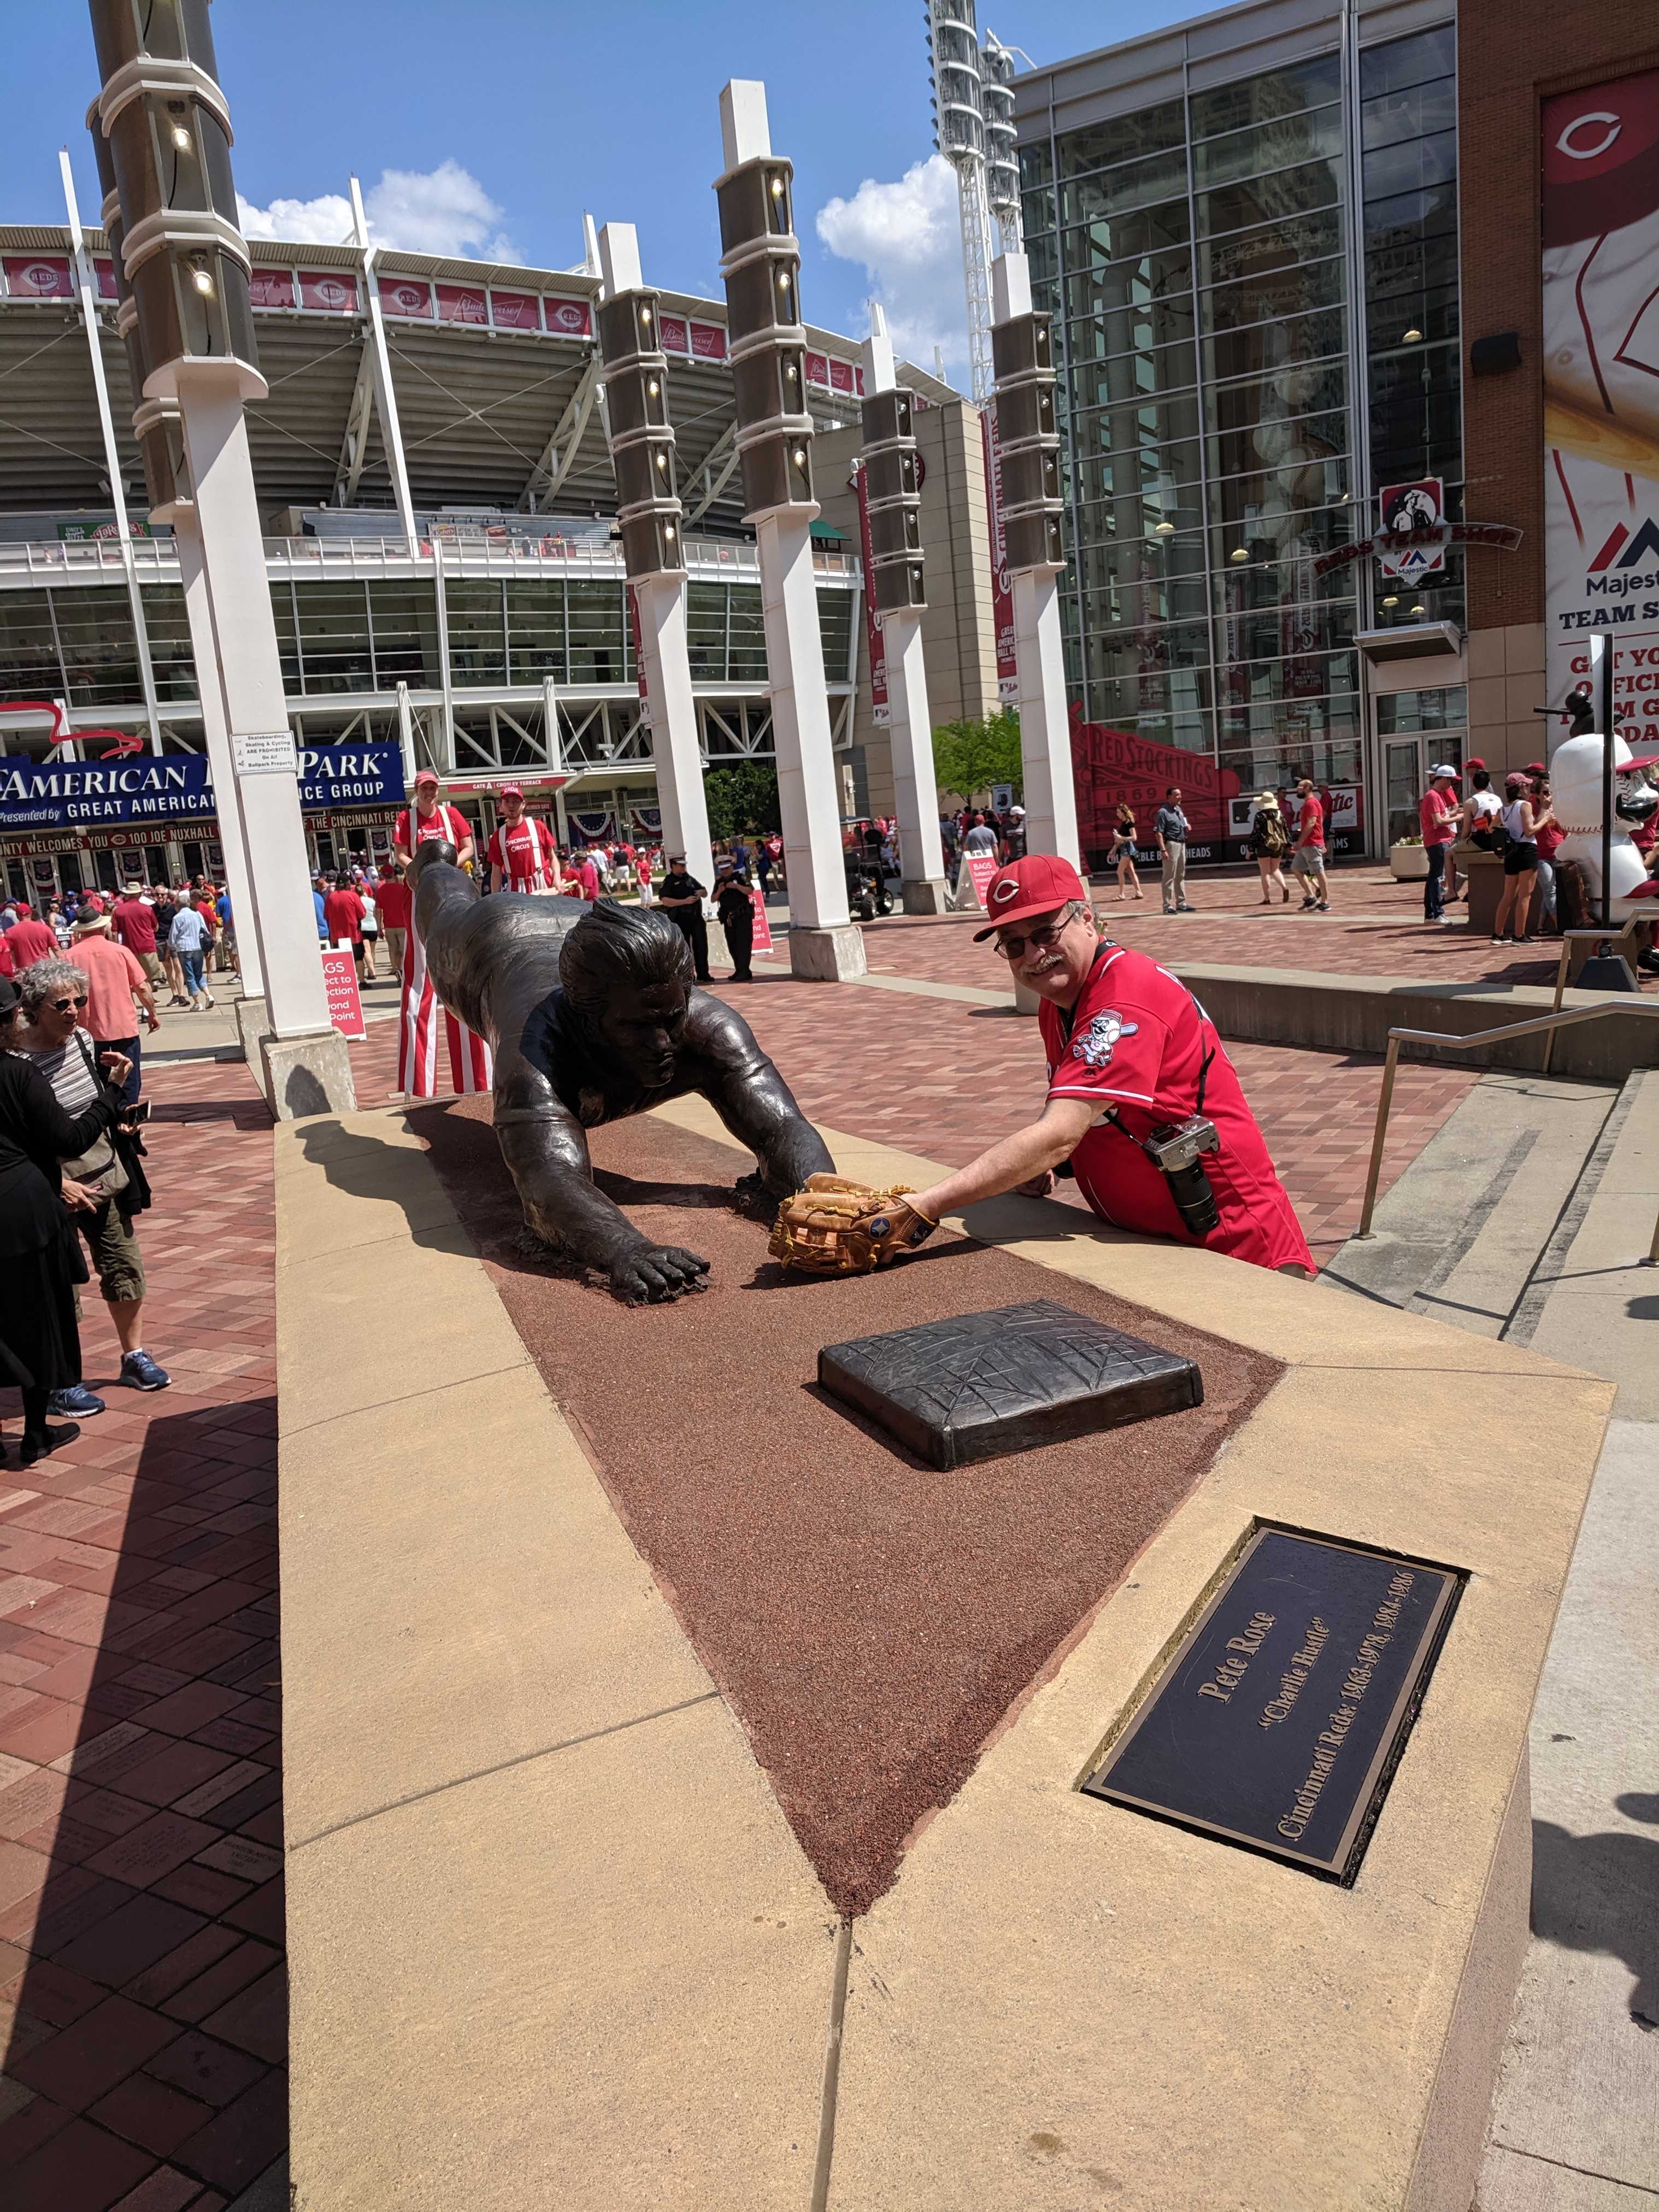 Figure 3: Statue of Charlie Hustle in action